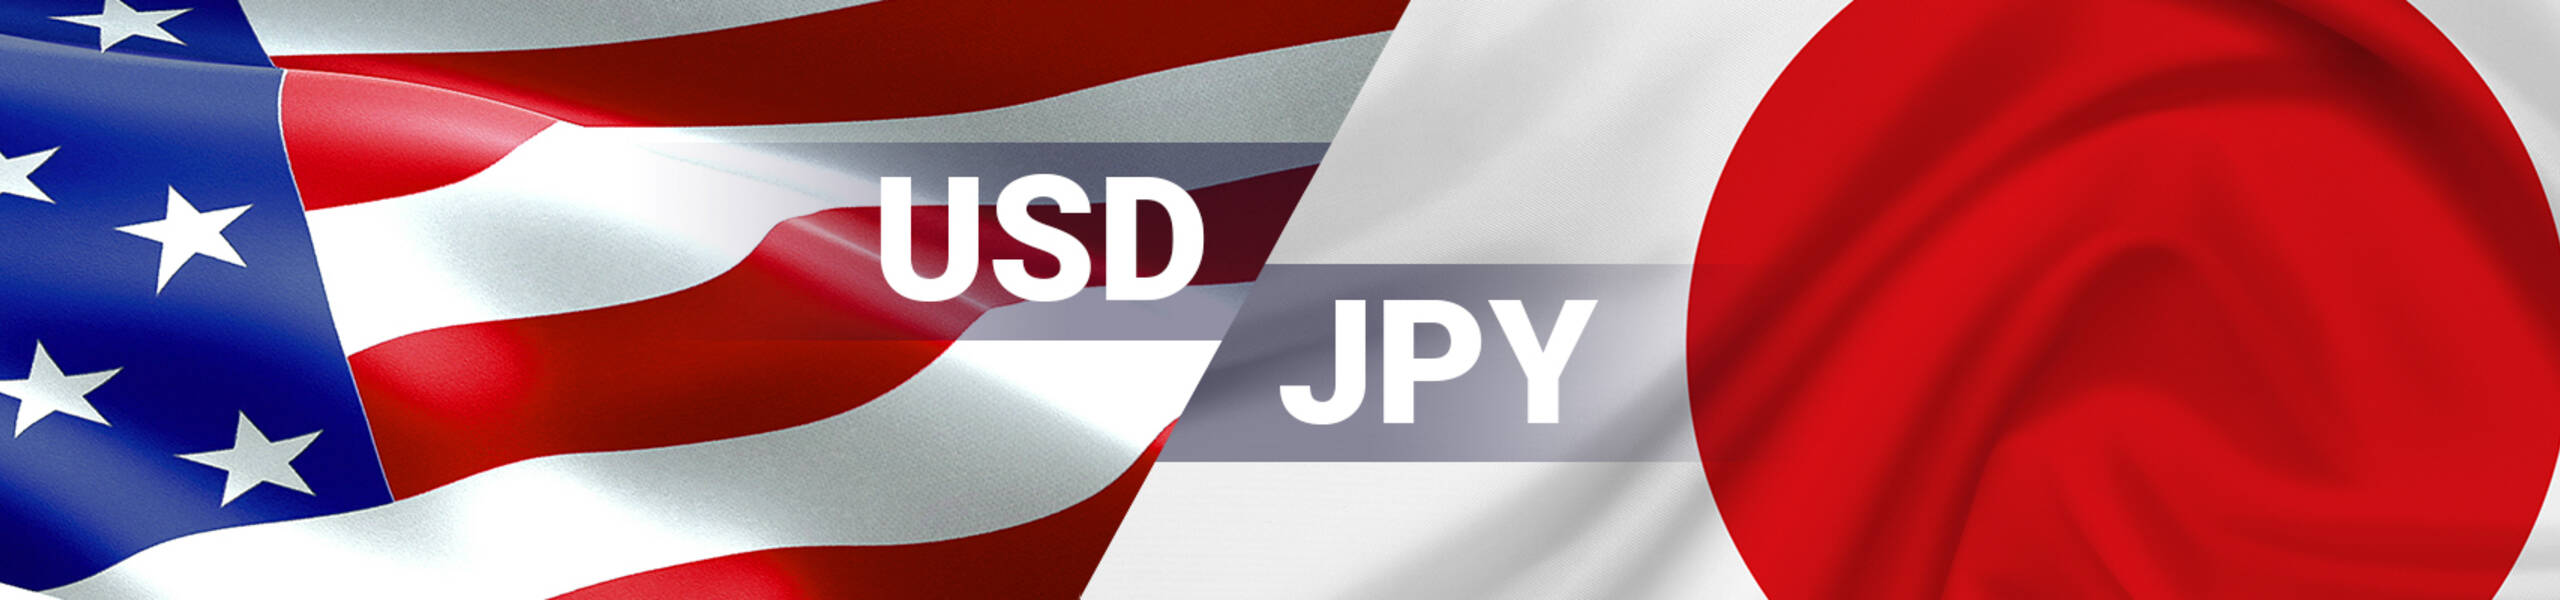 USD/JPY: dollar reached Cloud’s levels